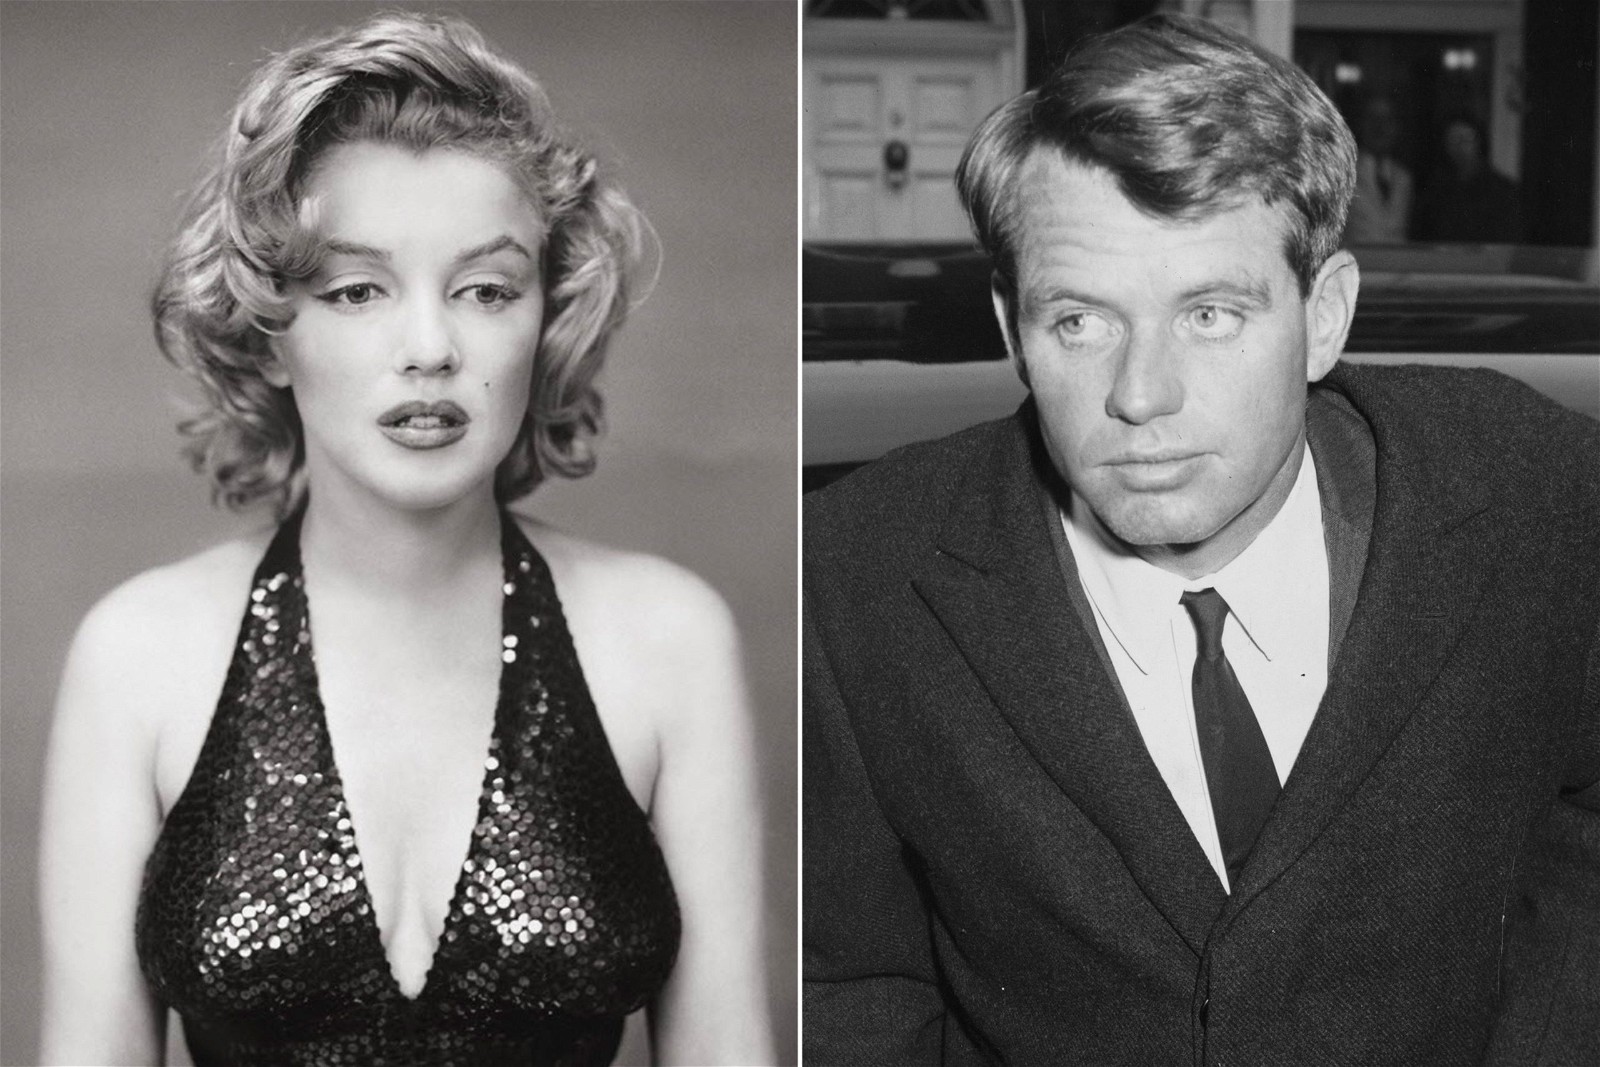 Russo claims Bobby Kennedy was behind Marilyn Monroe's death